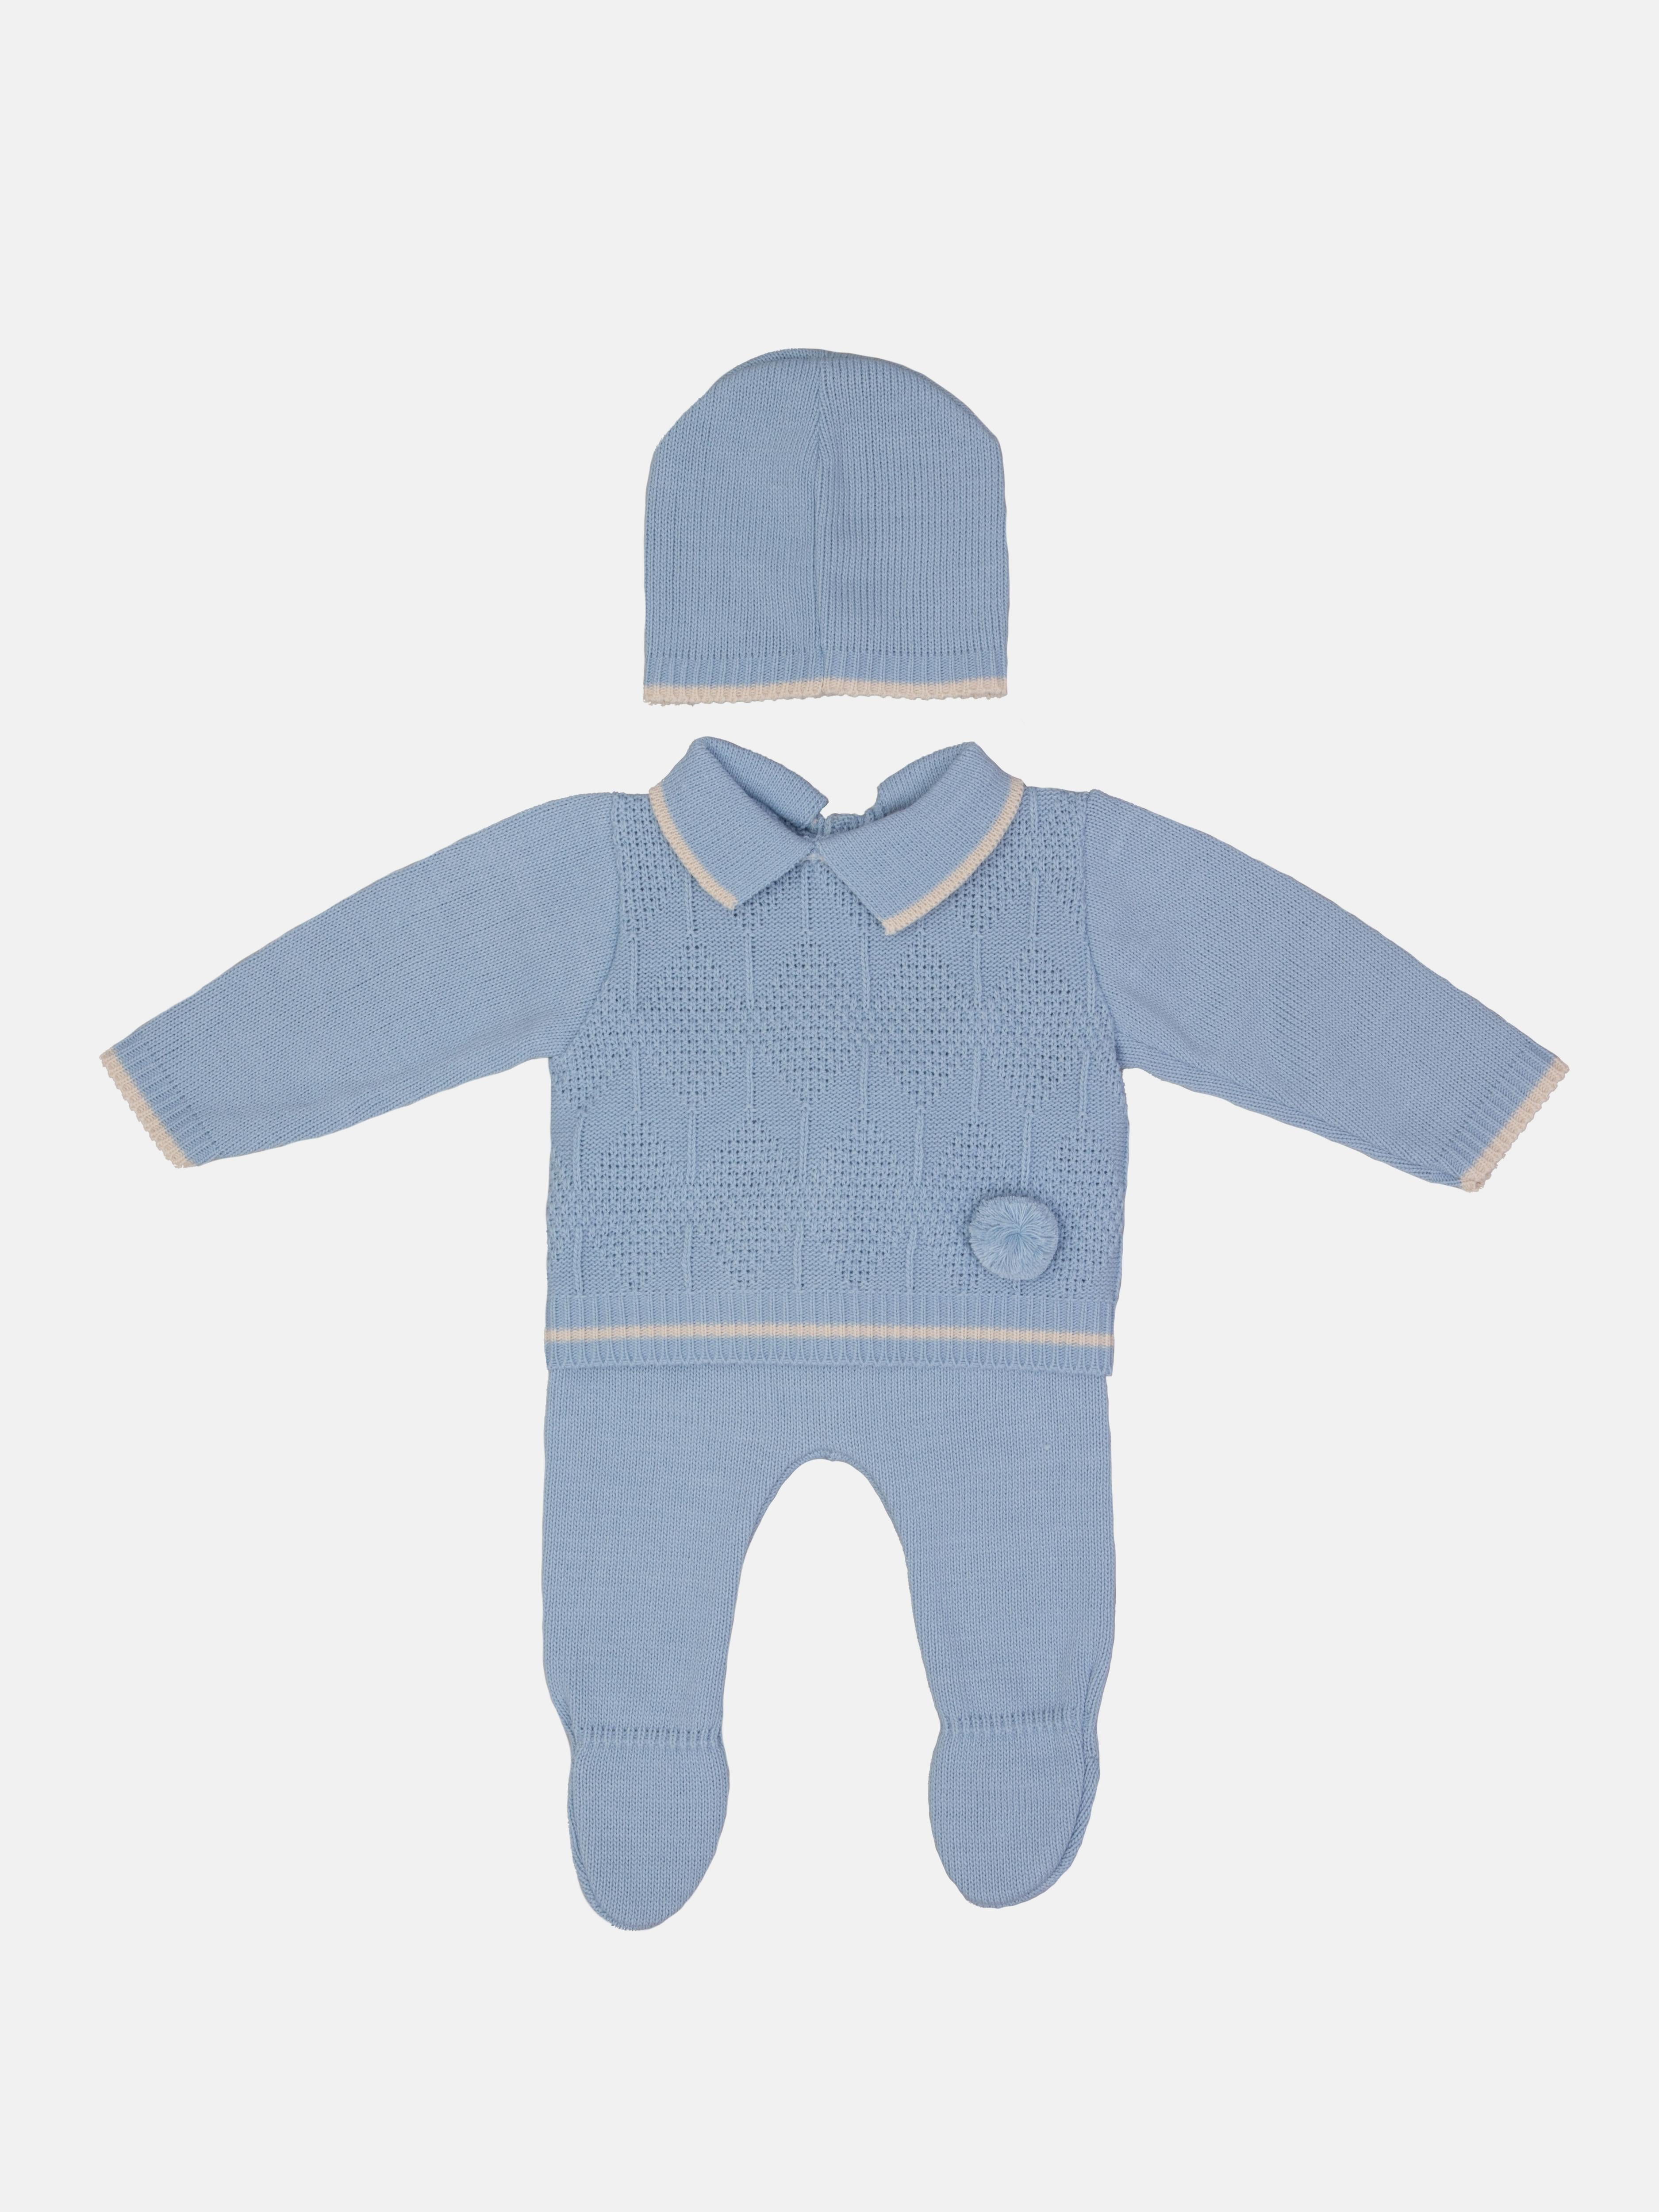 Baby Boy New Santiago Collection Knitted 3 piece set - Blue